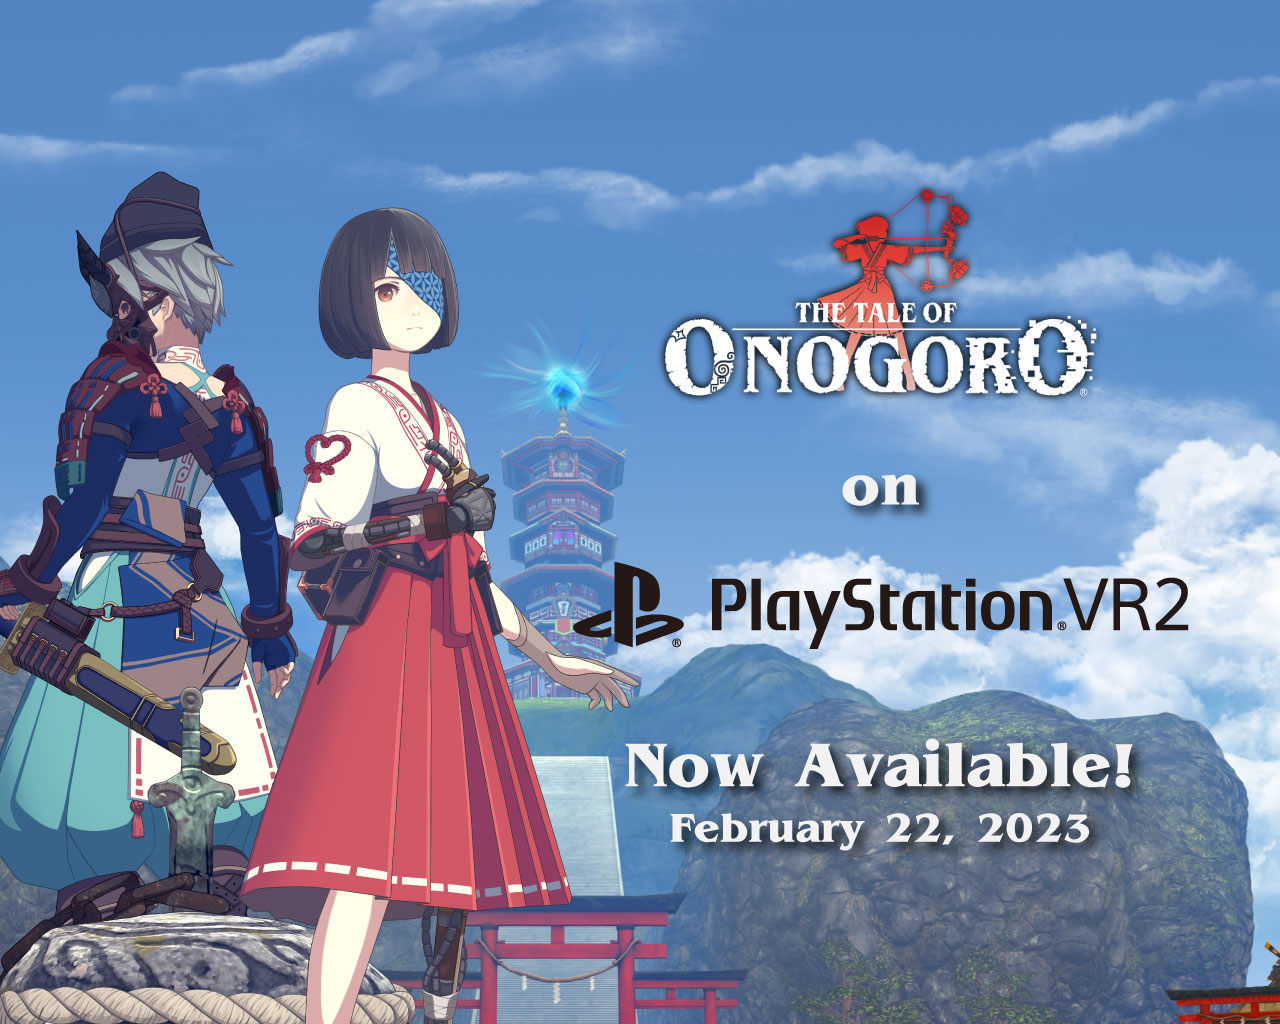 Tale of Onogoro Is A New VR Anime Adventure For Quest